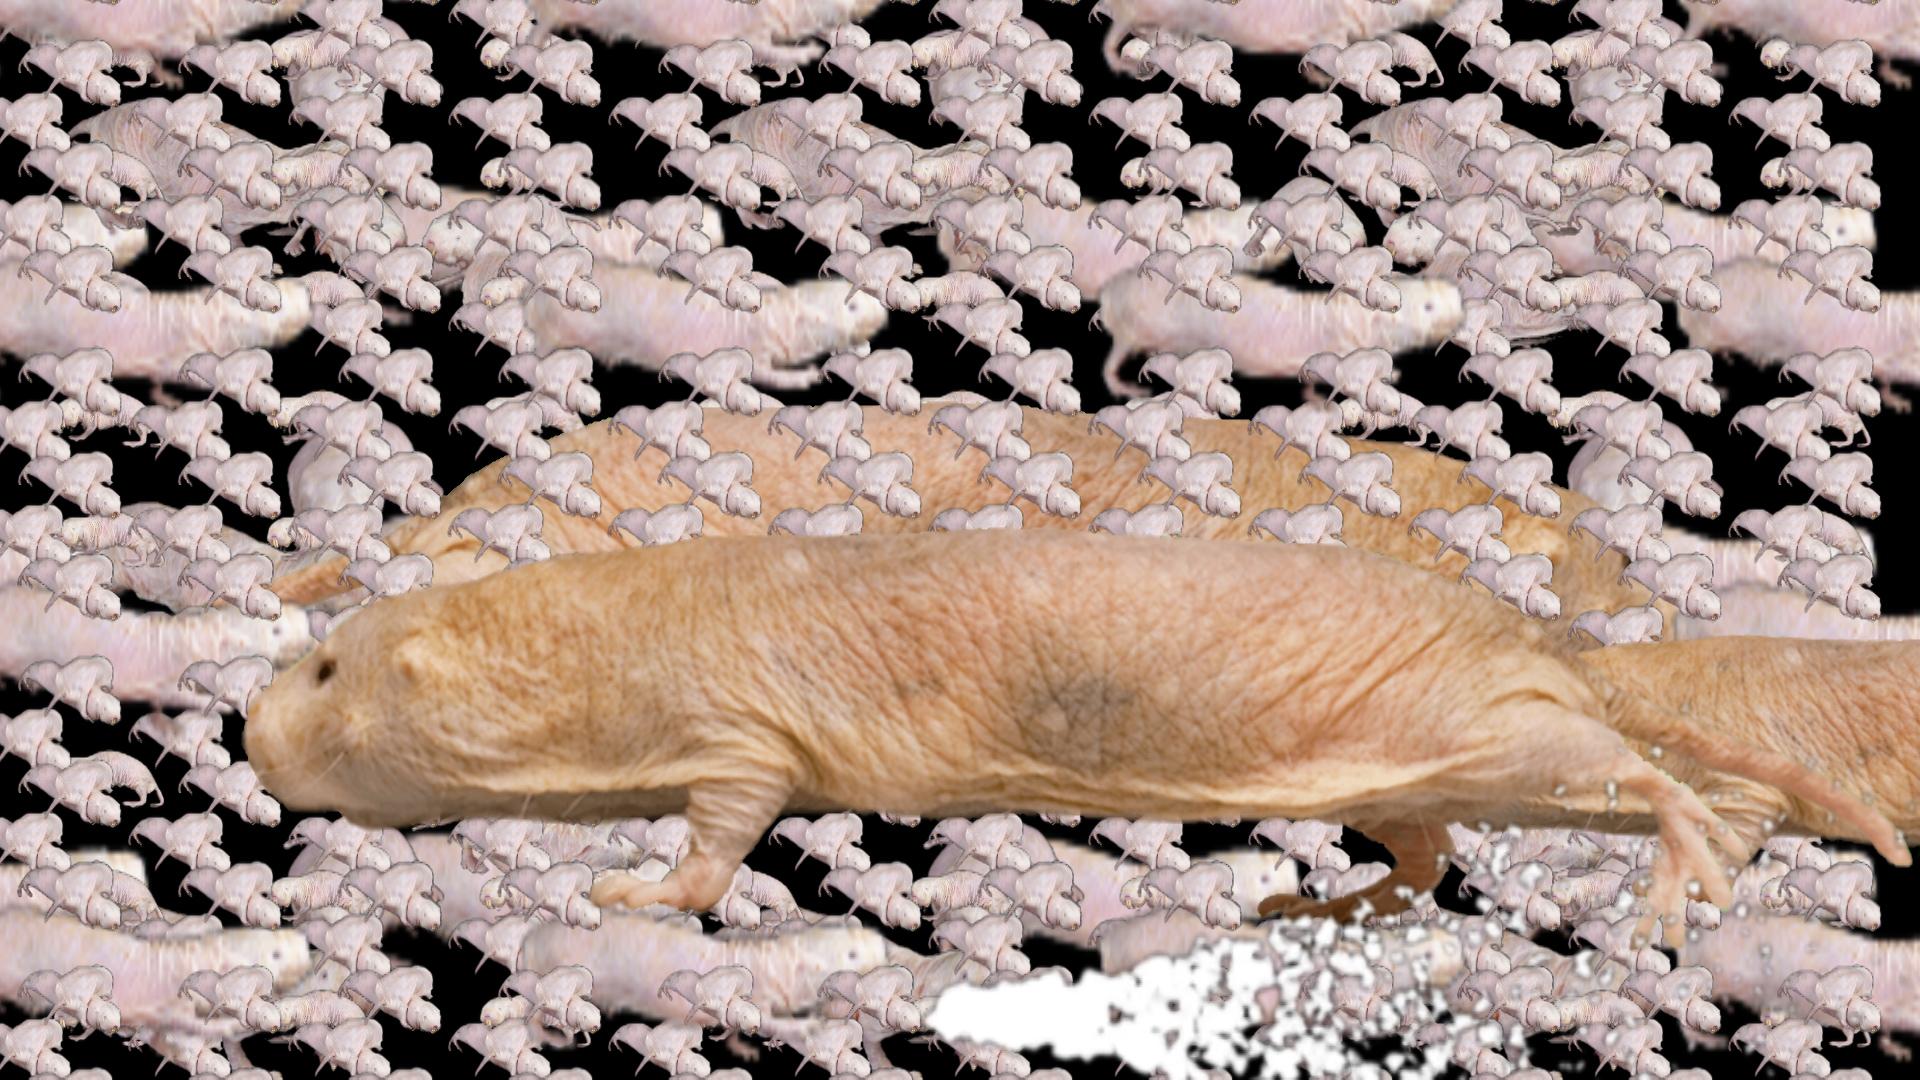 A large image of a naked mole rat appears over many smaller tessellated images of different naked mole rats.